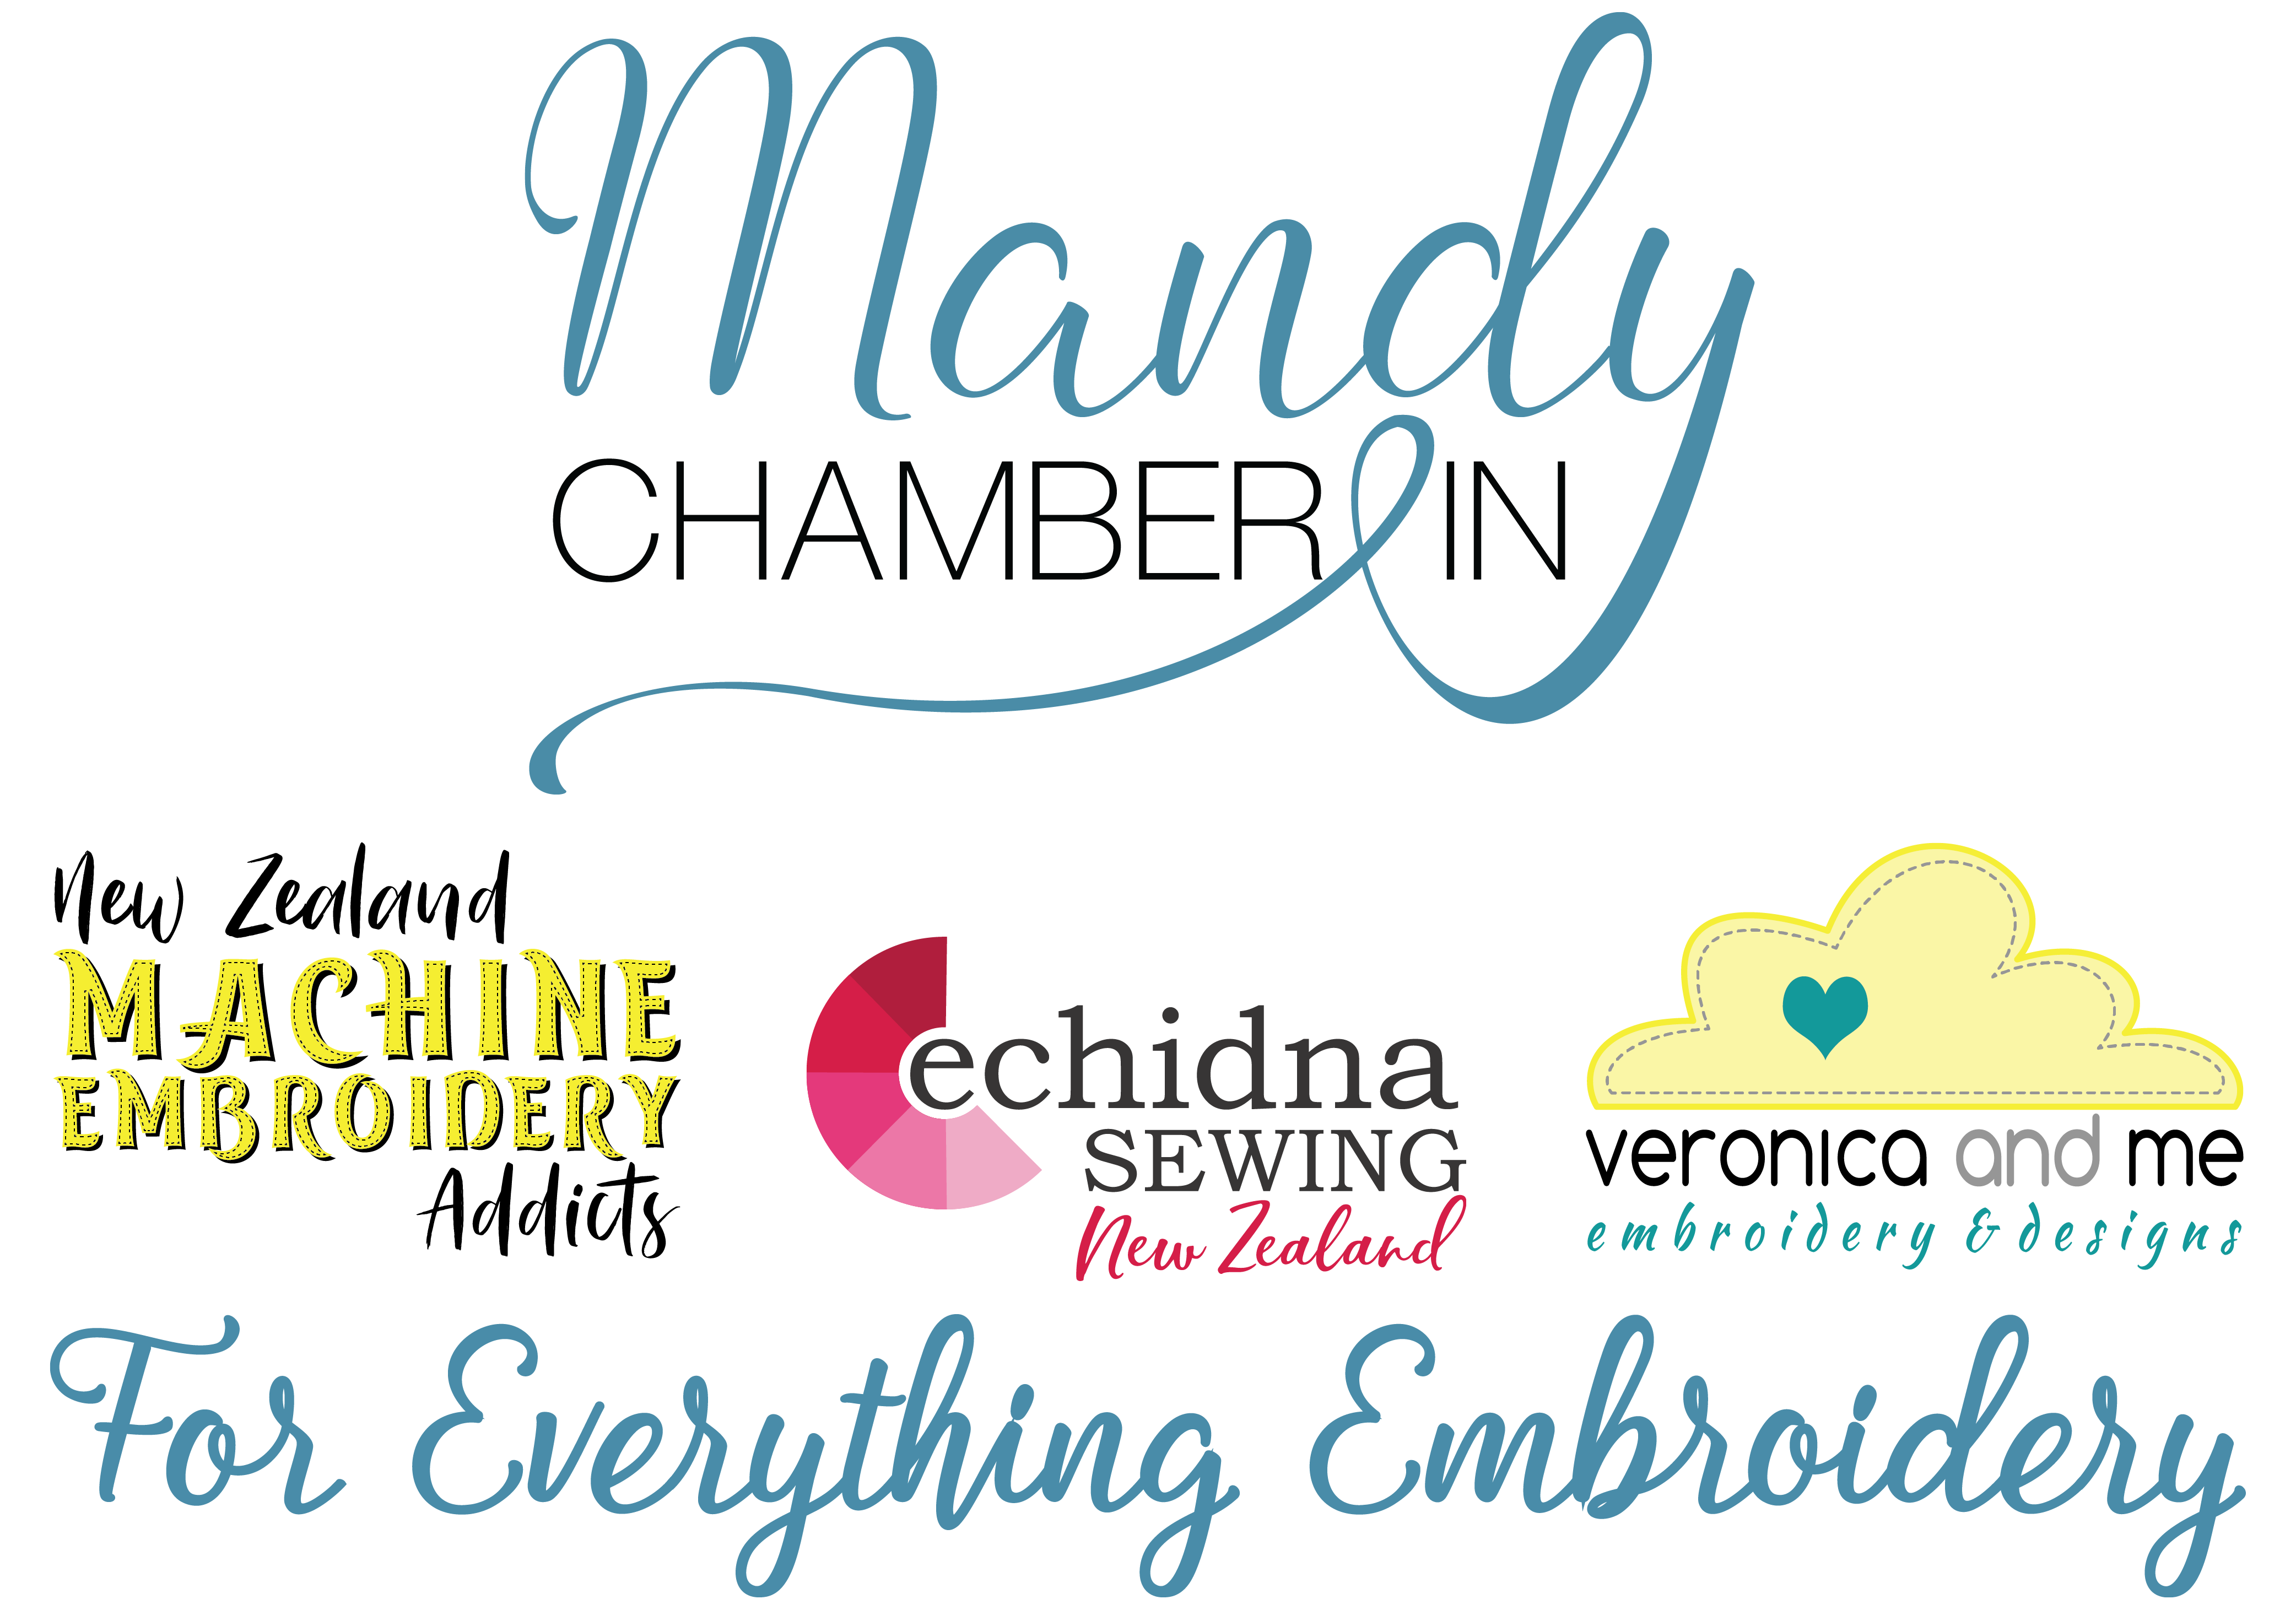 Mandy Chamberlin - For Everything Embroidery